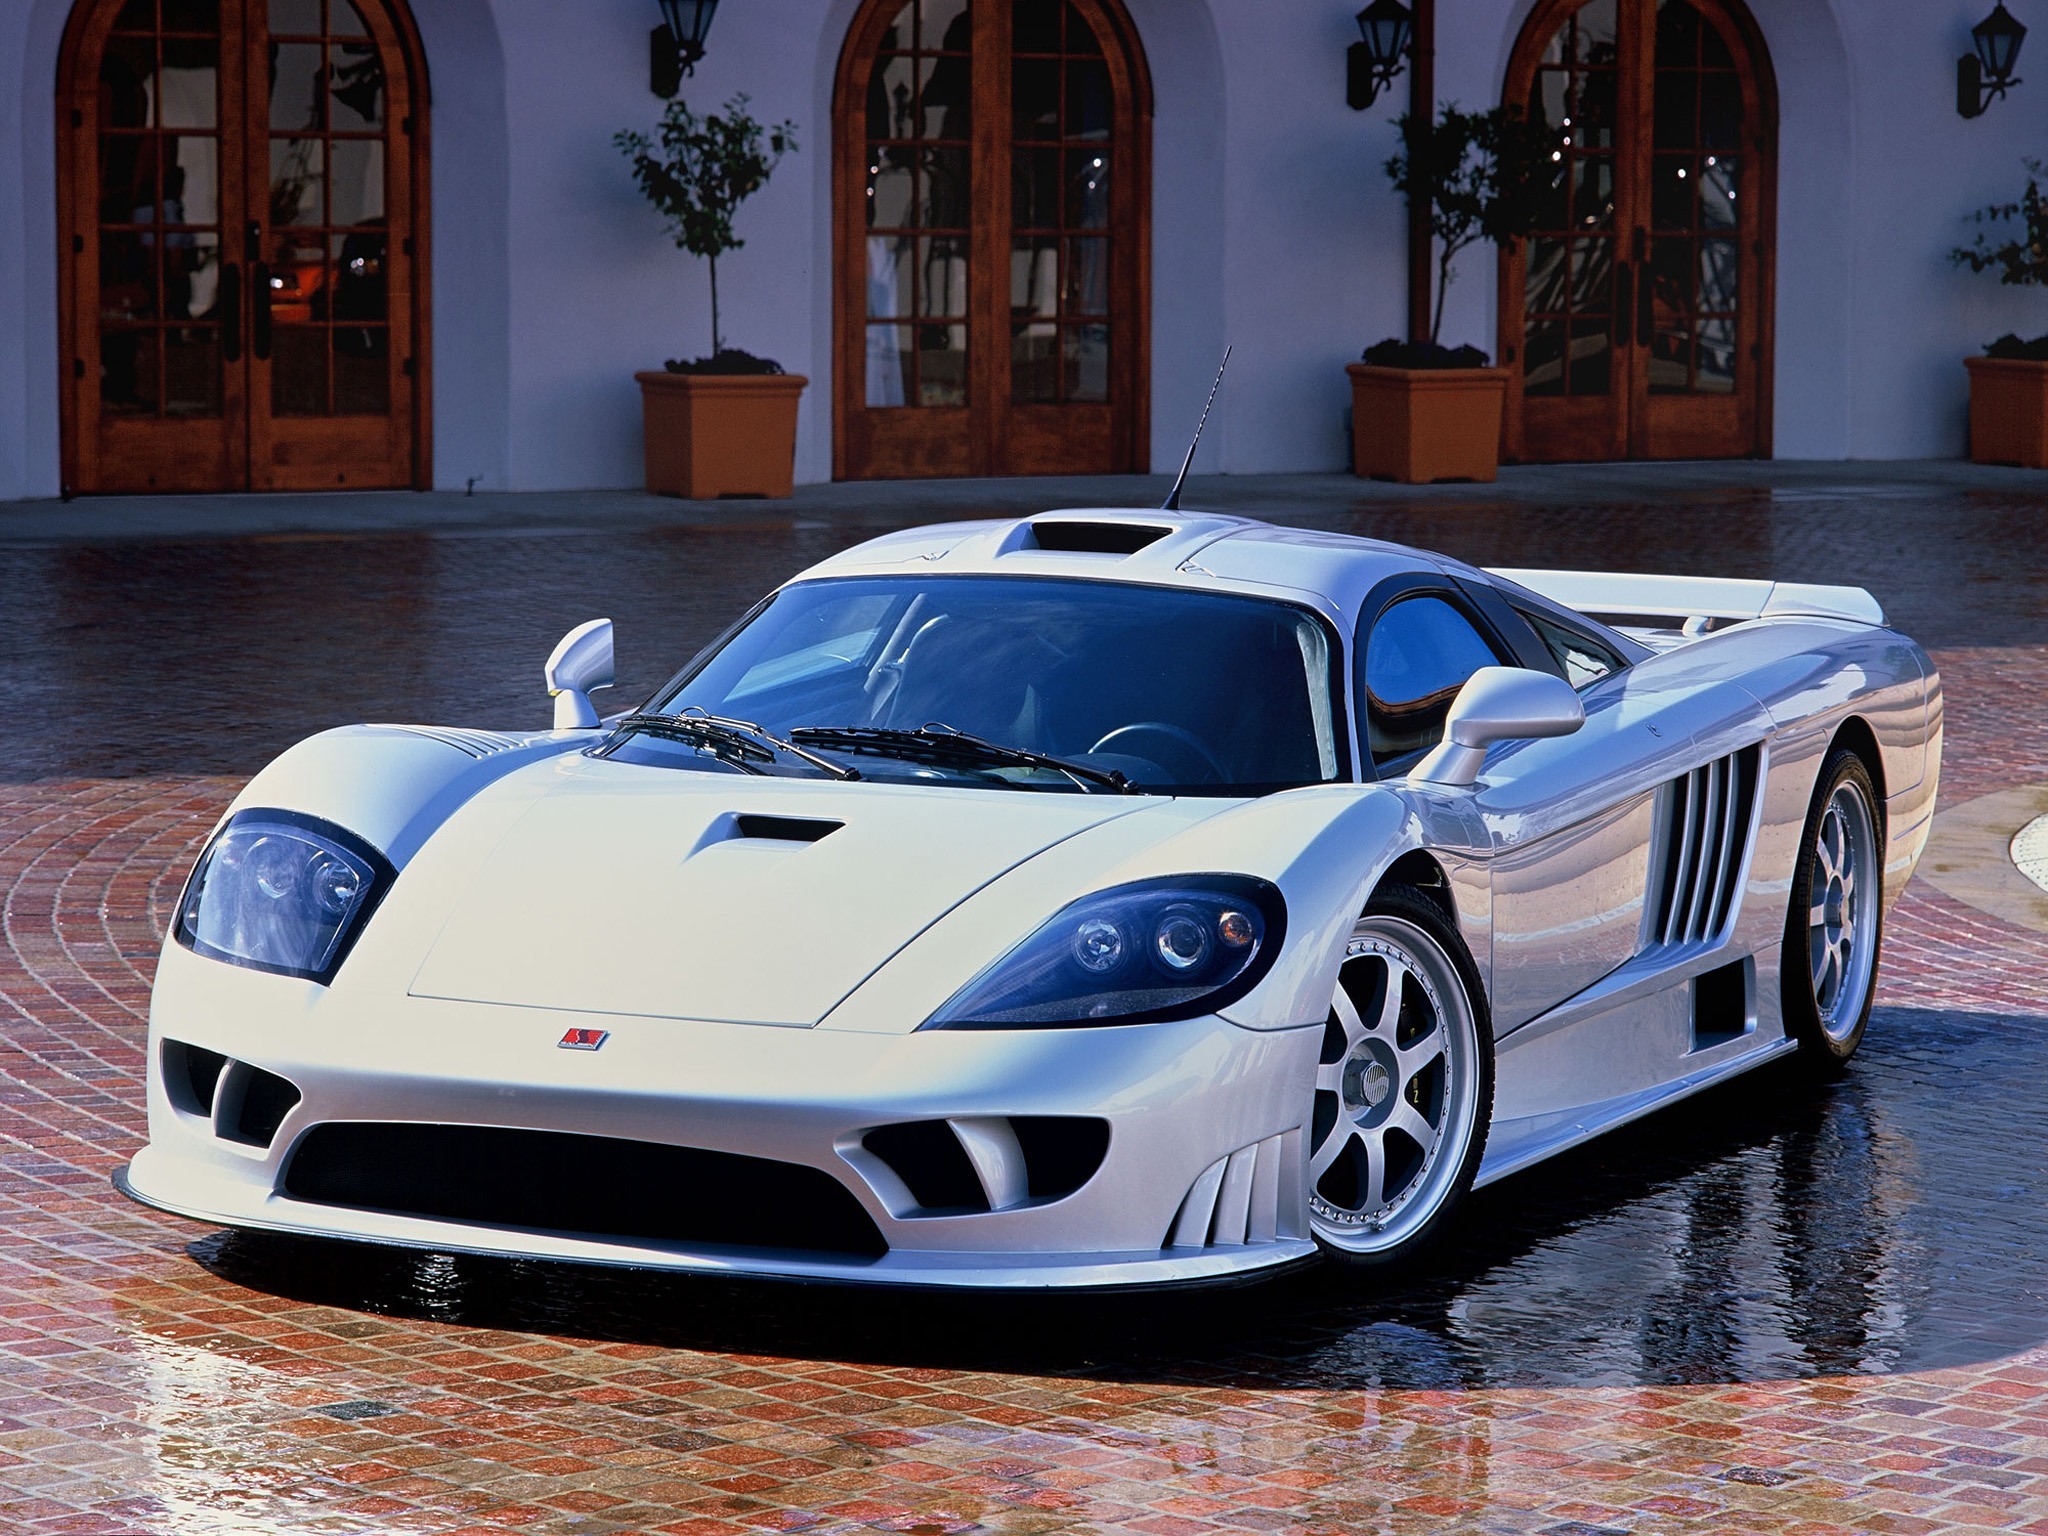 Saleen - the history of the brand. - Supercar, Auto, Ford, 24 Hours of Le Mans, Sports car, V8, Turbo, Video, Longpost